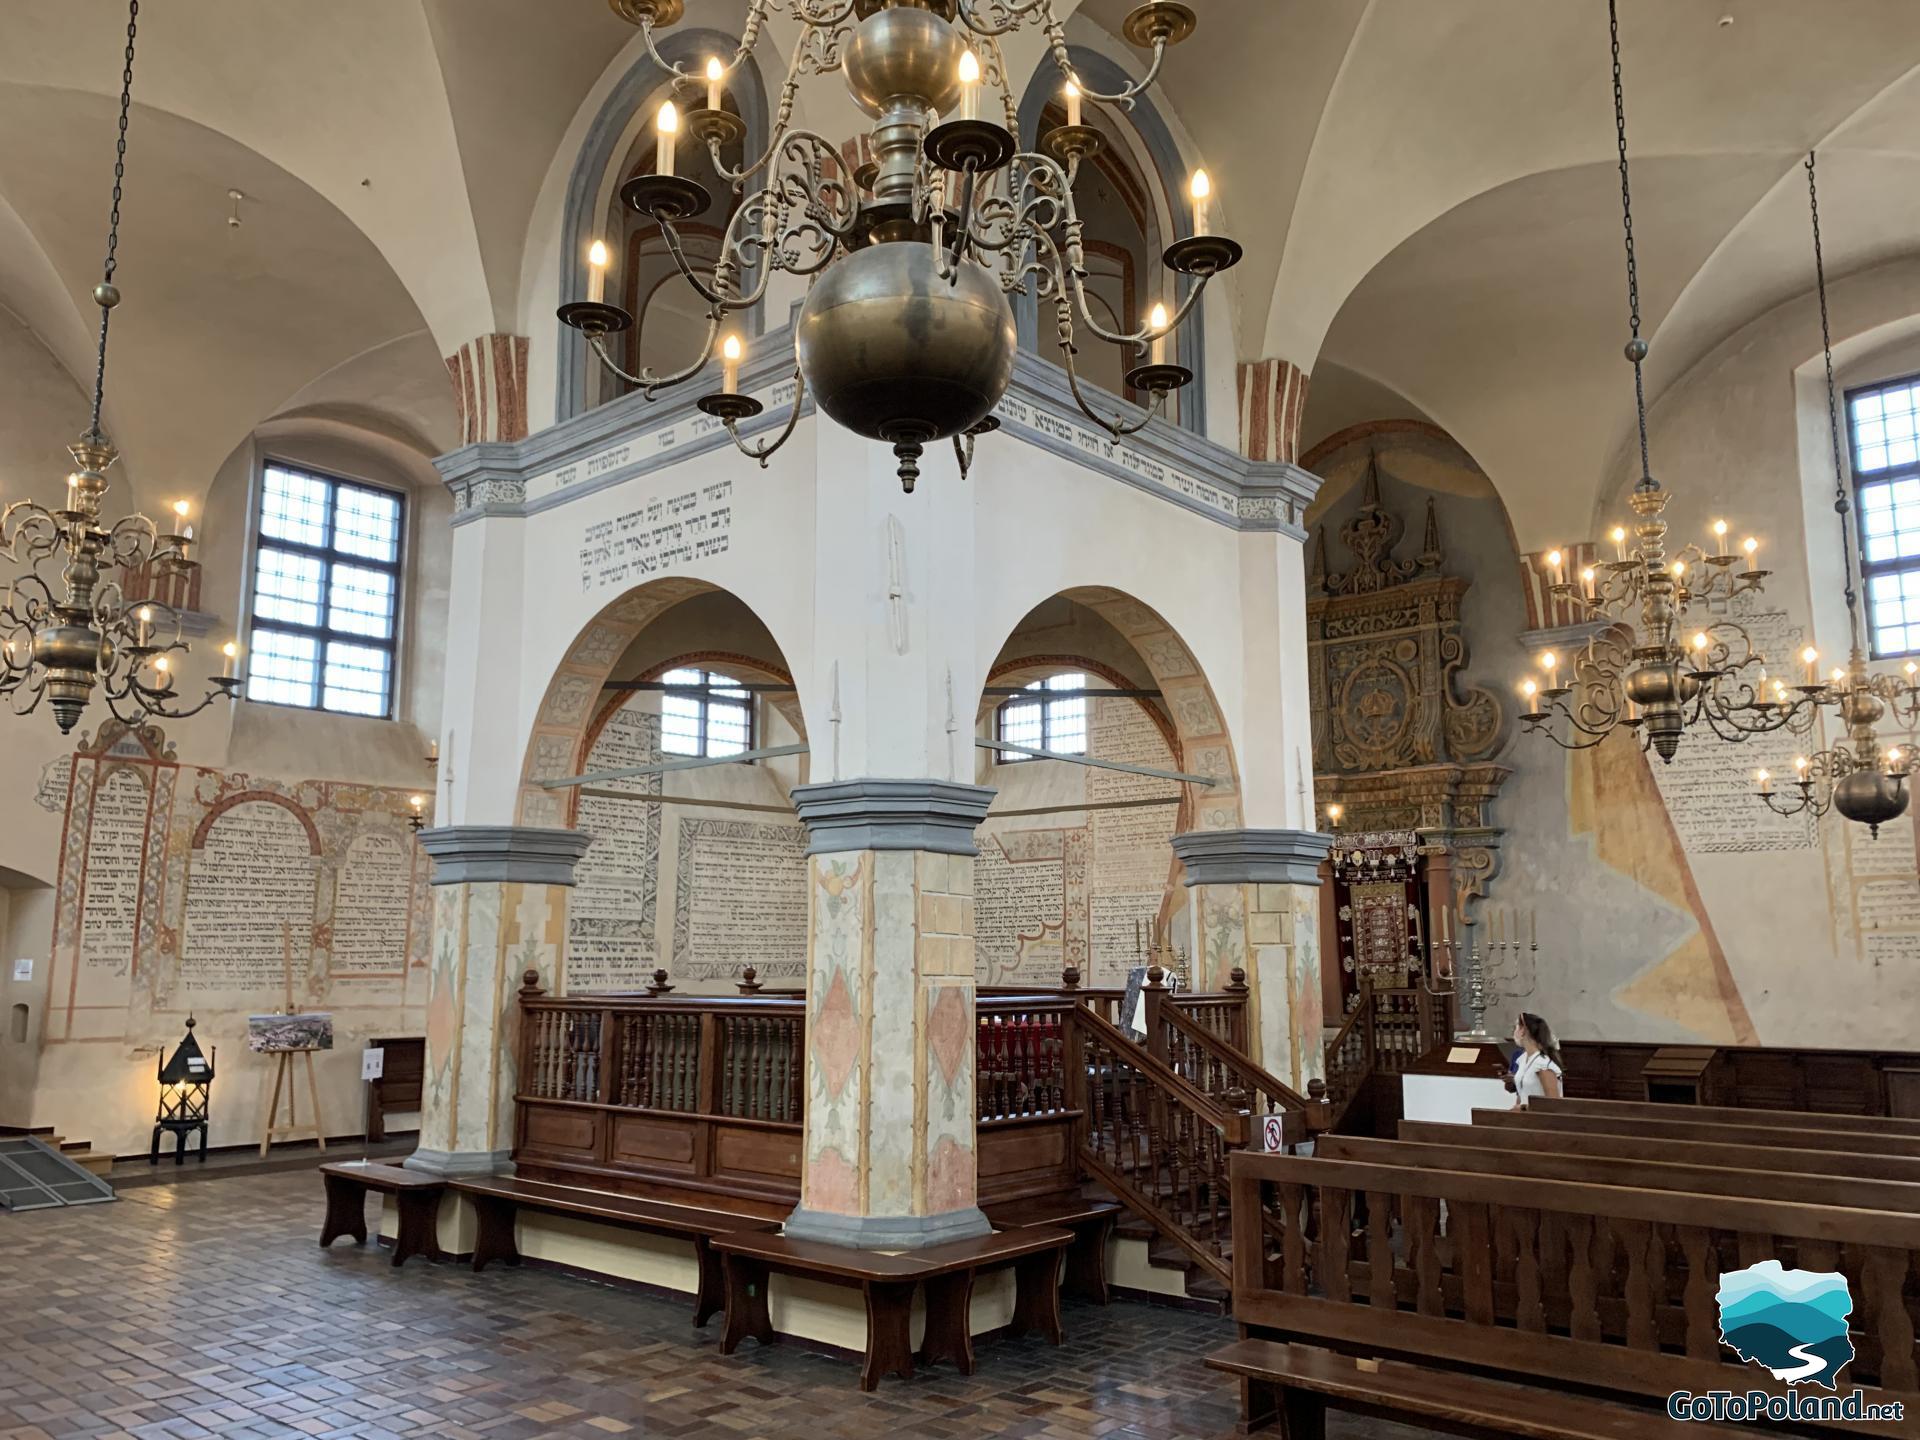 bimah in the synagogue, 4 chandeliers are lit, wooden benches, walls with Jewish inscriptions